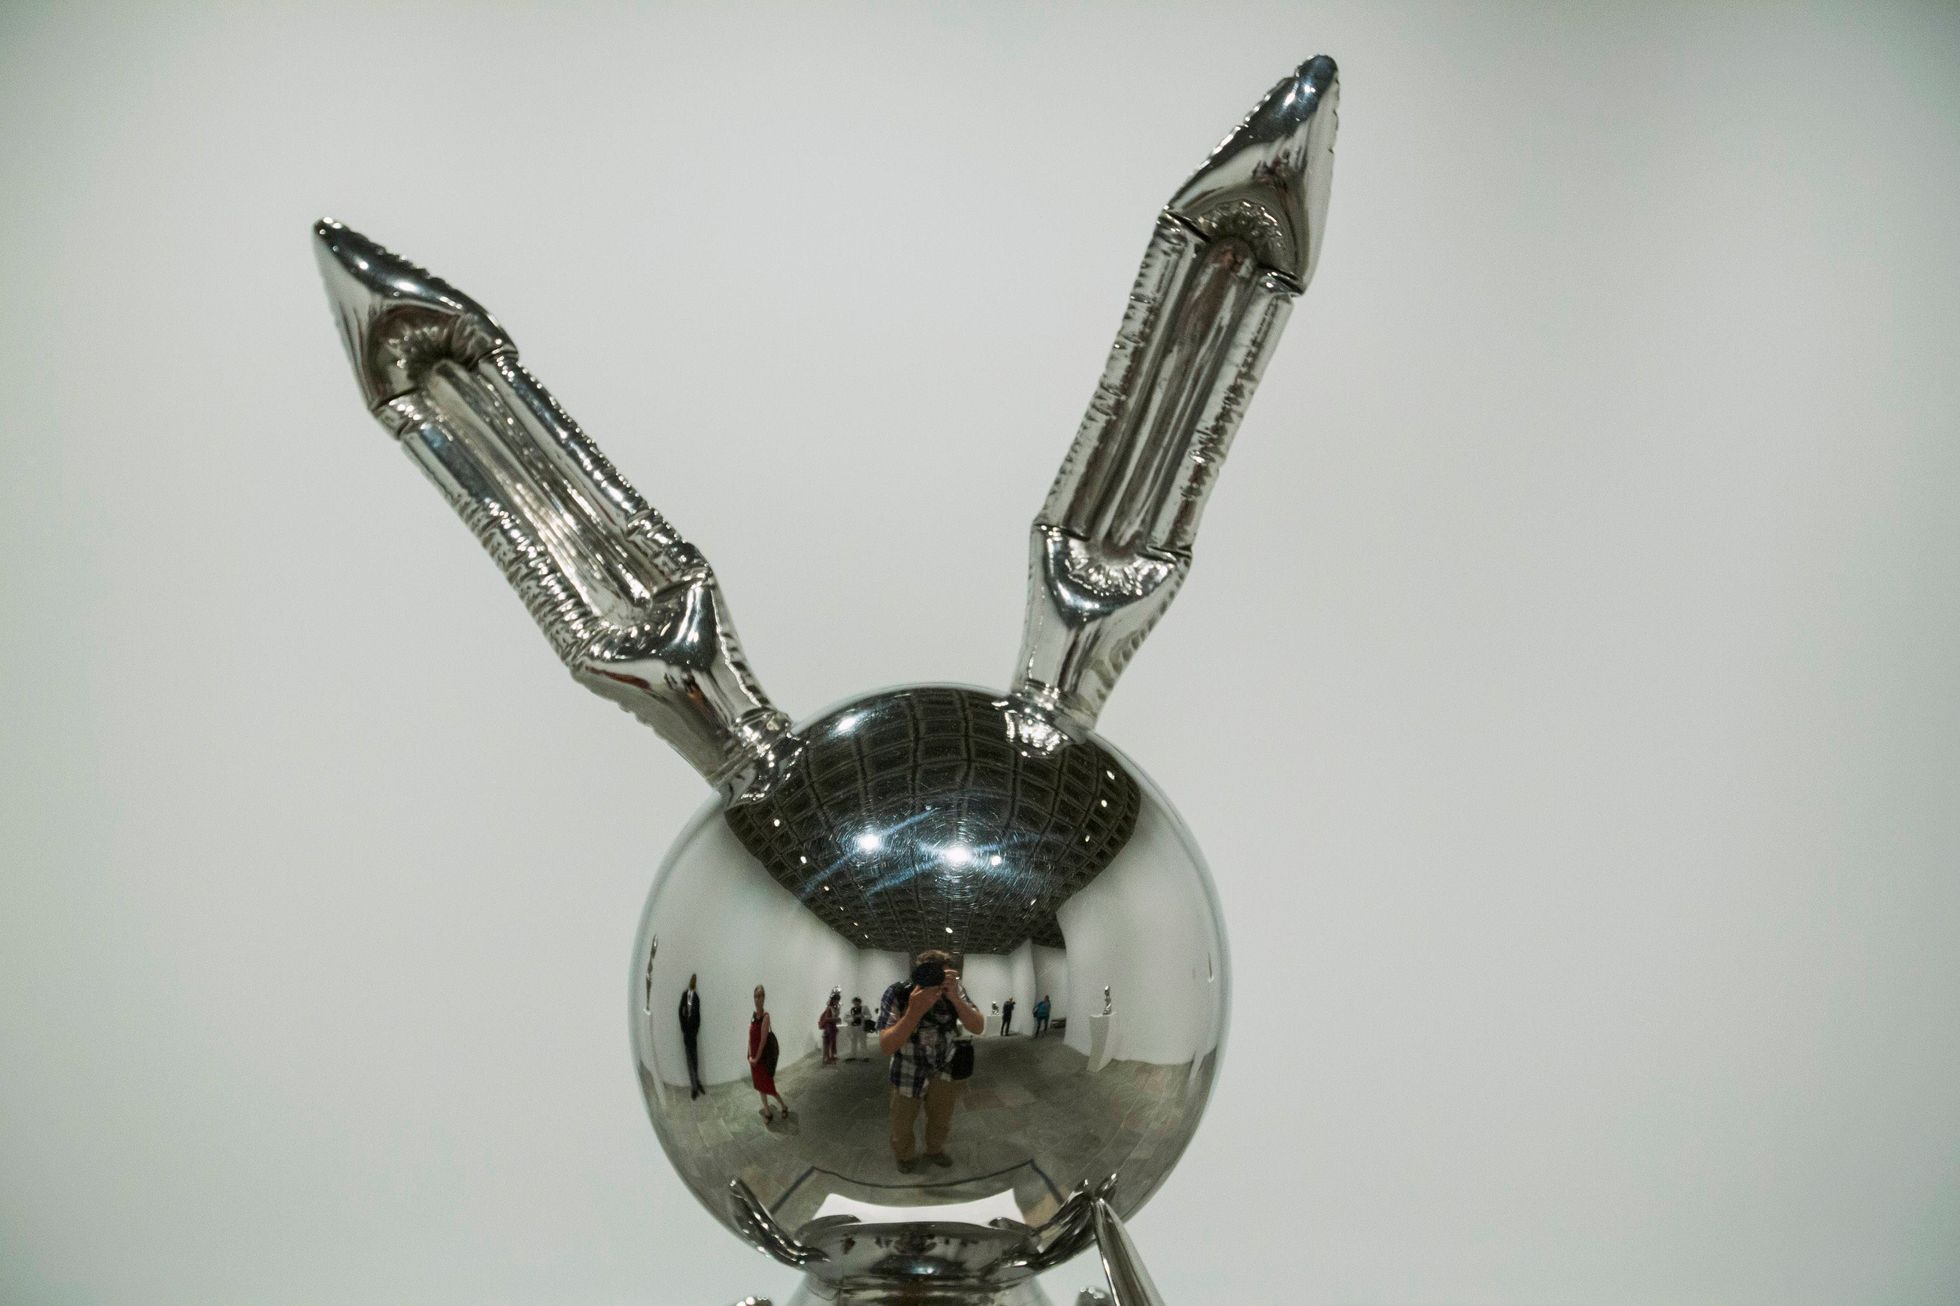 Photographer Lucas Jackson is reflected in the sculpture Rabbit during a media preview before the opening of a Jeff Koons retrospective at the Whitney Museum of American Art in New York